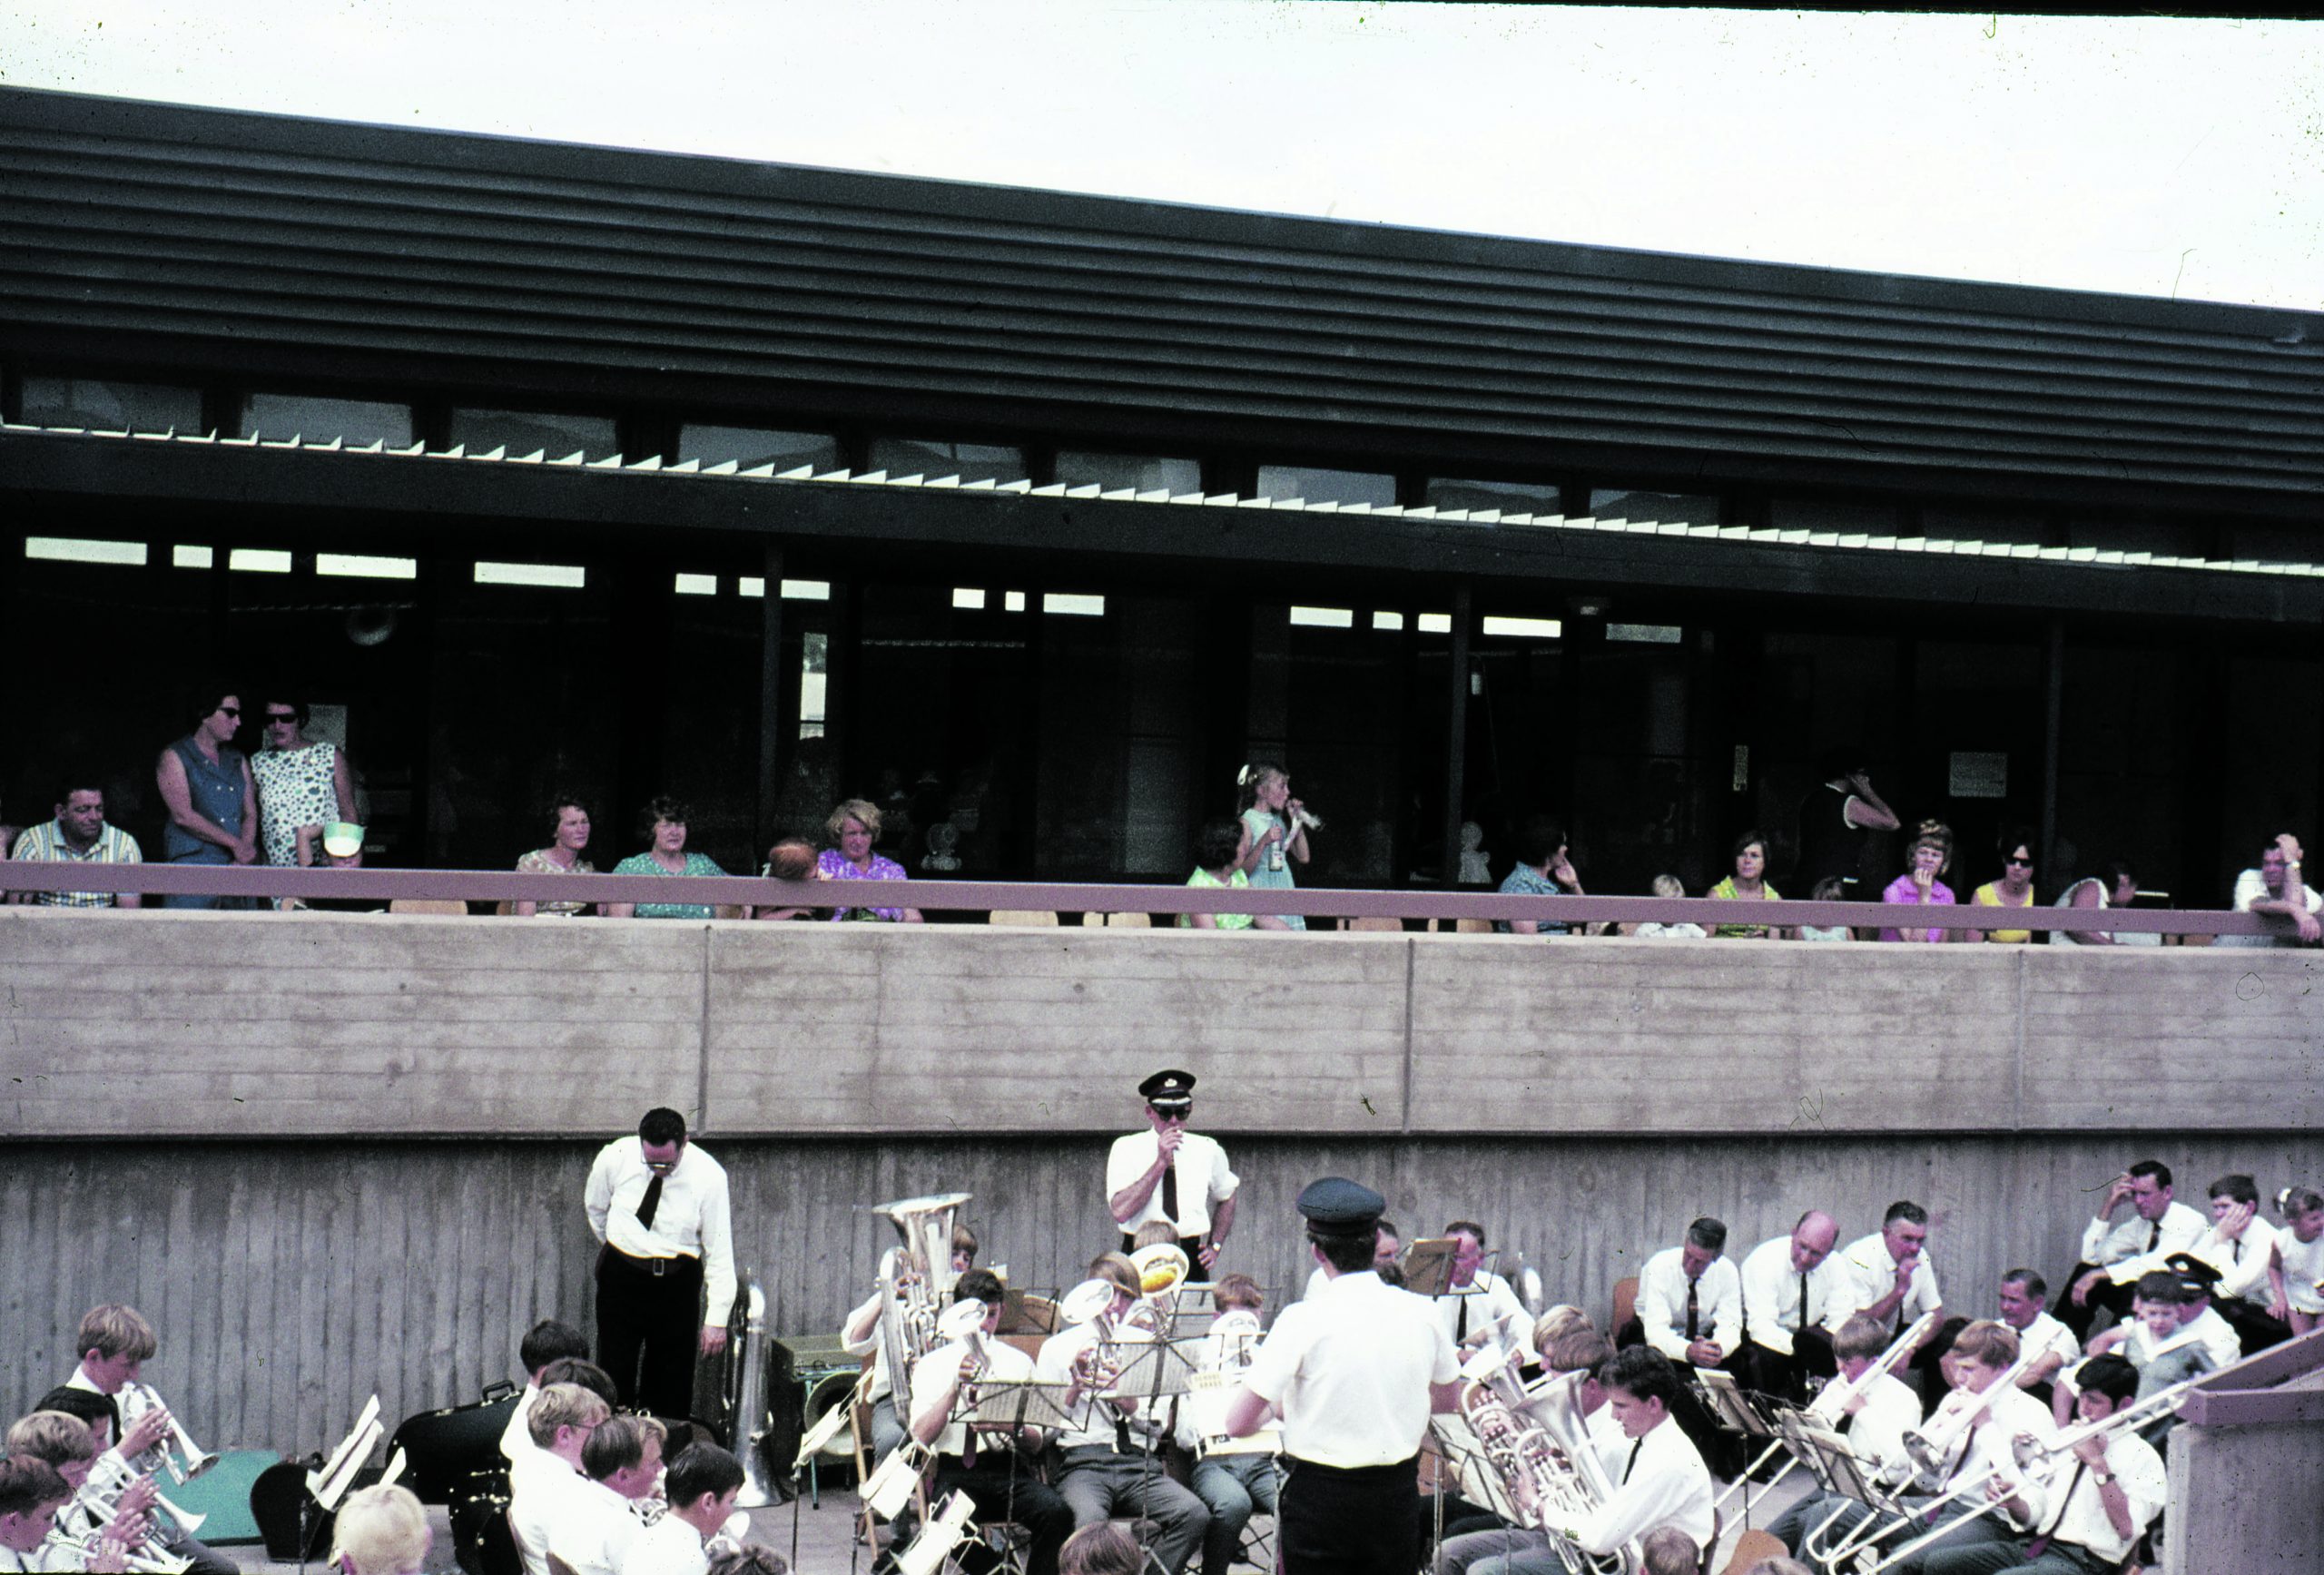 The BIU Band played at Central School in the late 1960s and Stephen is pictured to the conductor’s right at the front of the euphonium row. Wayne Orr is in the cornet row at the left of the conductor, second from the front.